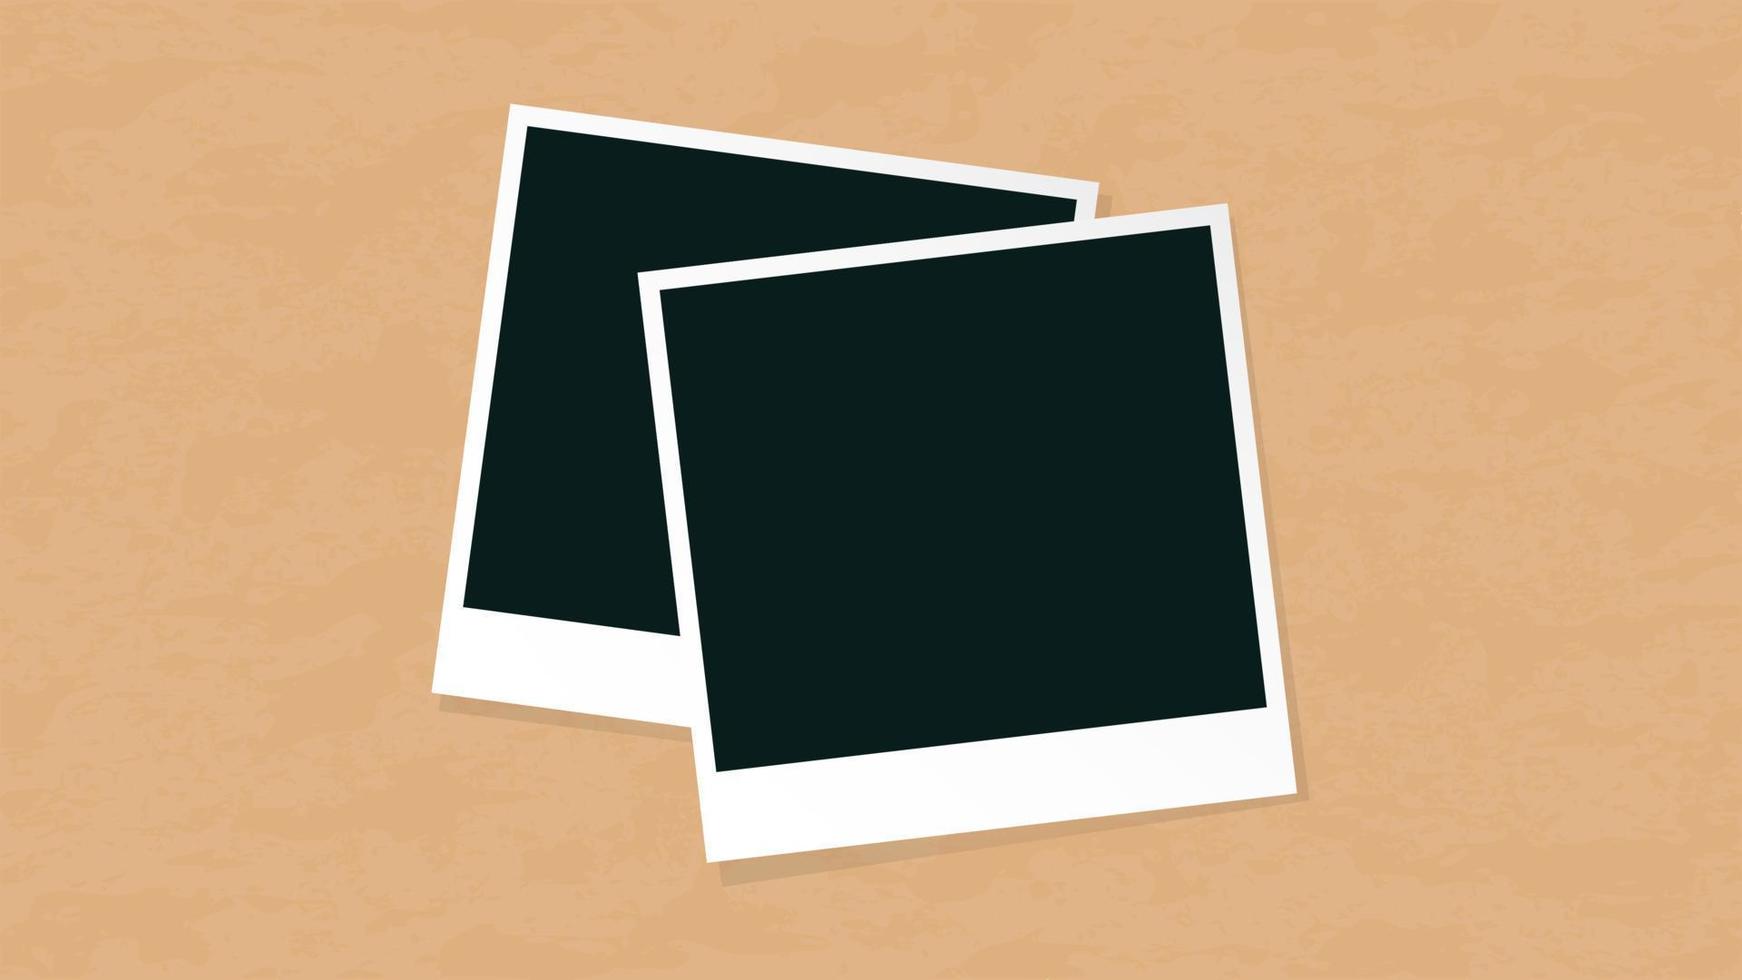 Blank Instant Picture Frames on Wall Template vector